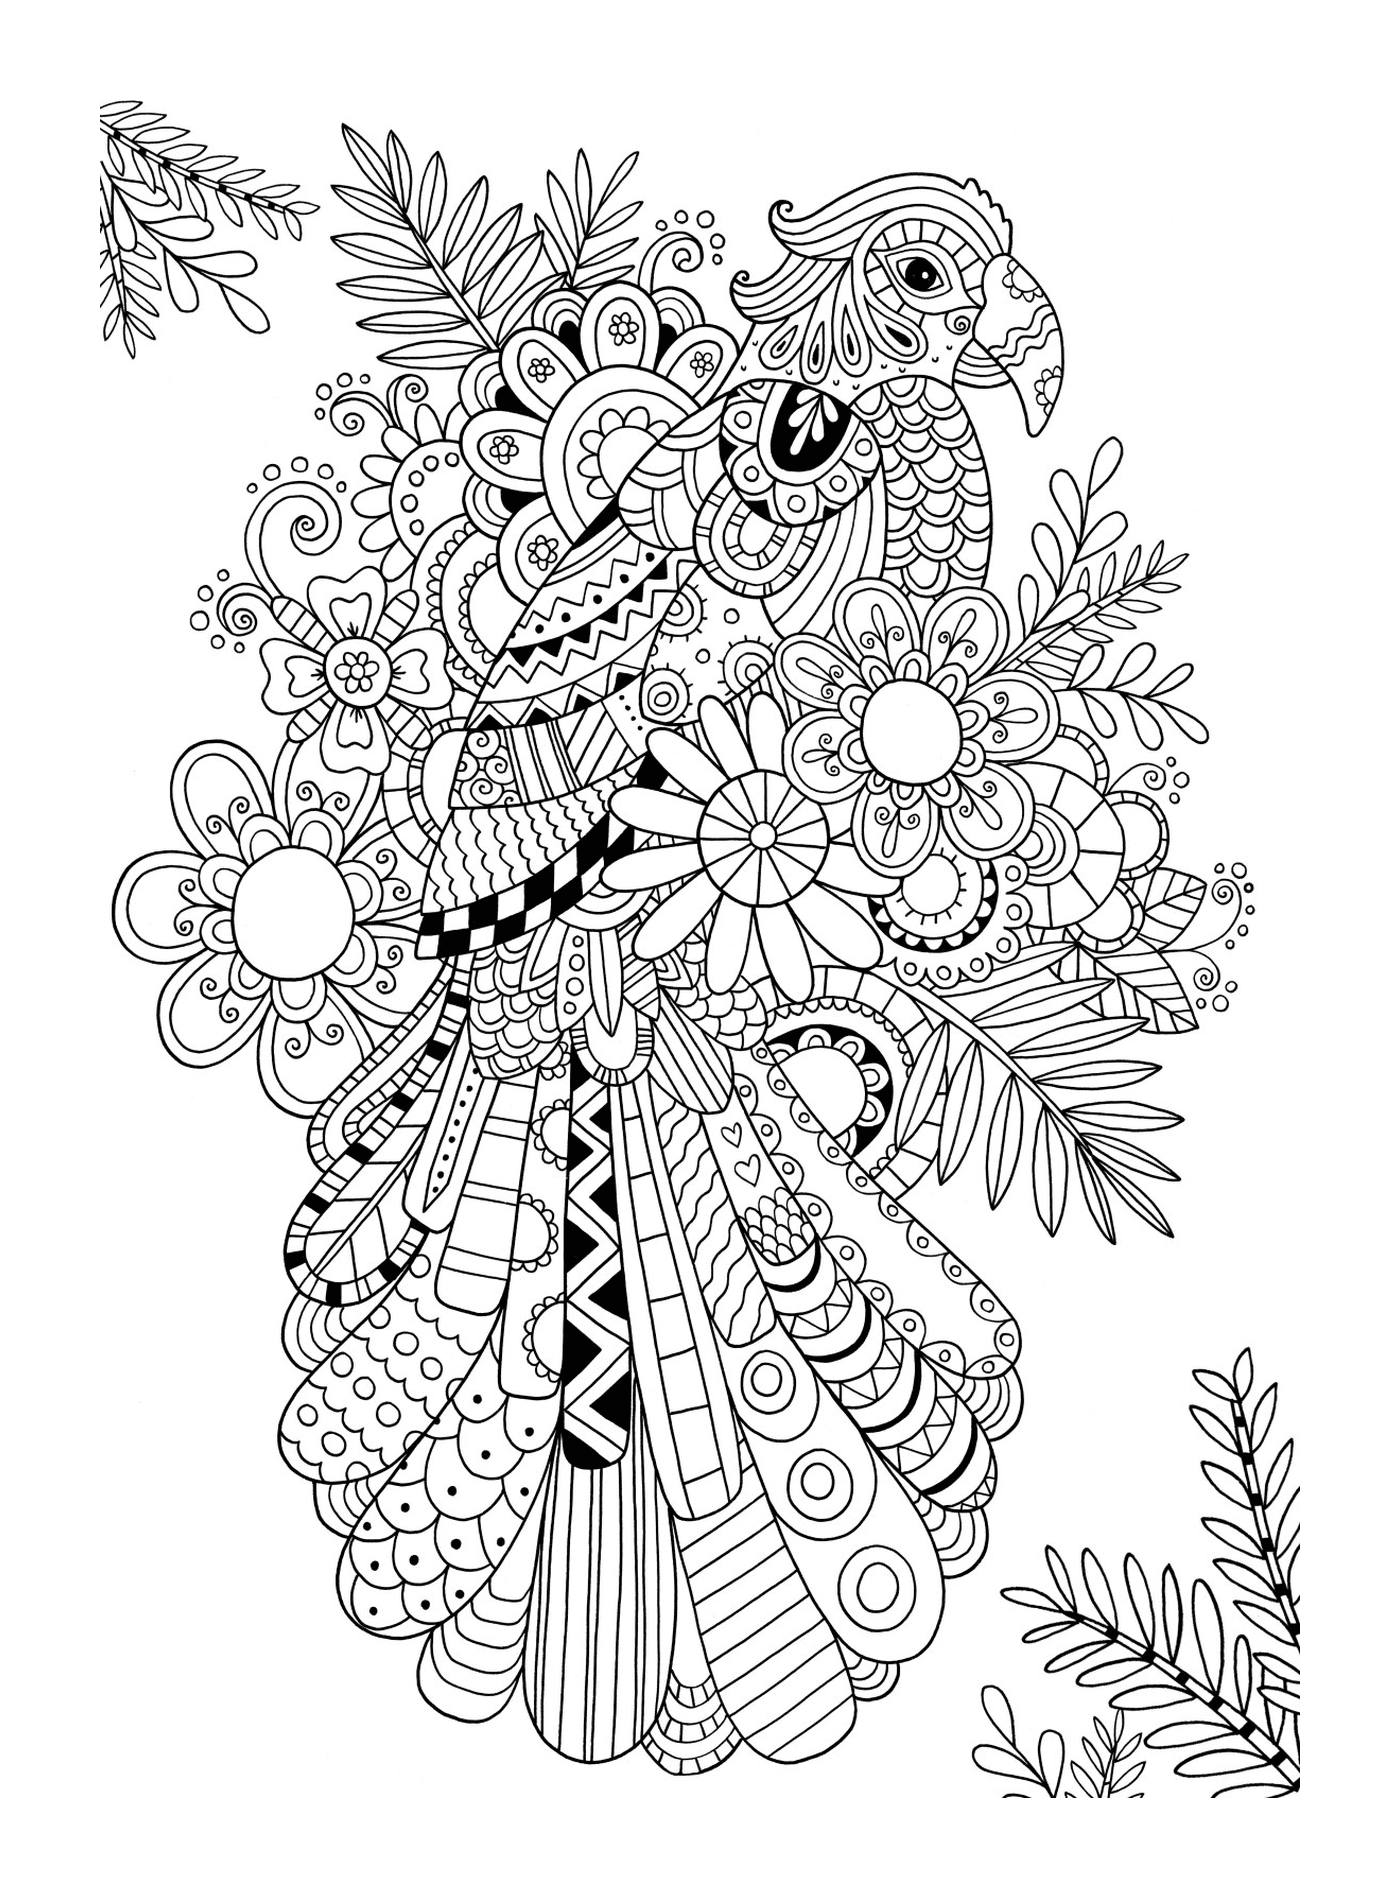  A peacock with flowers 